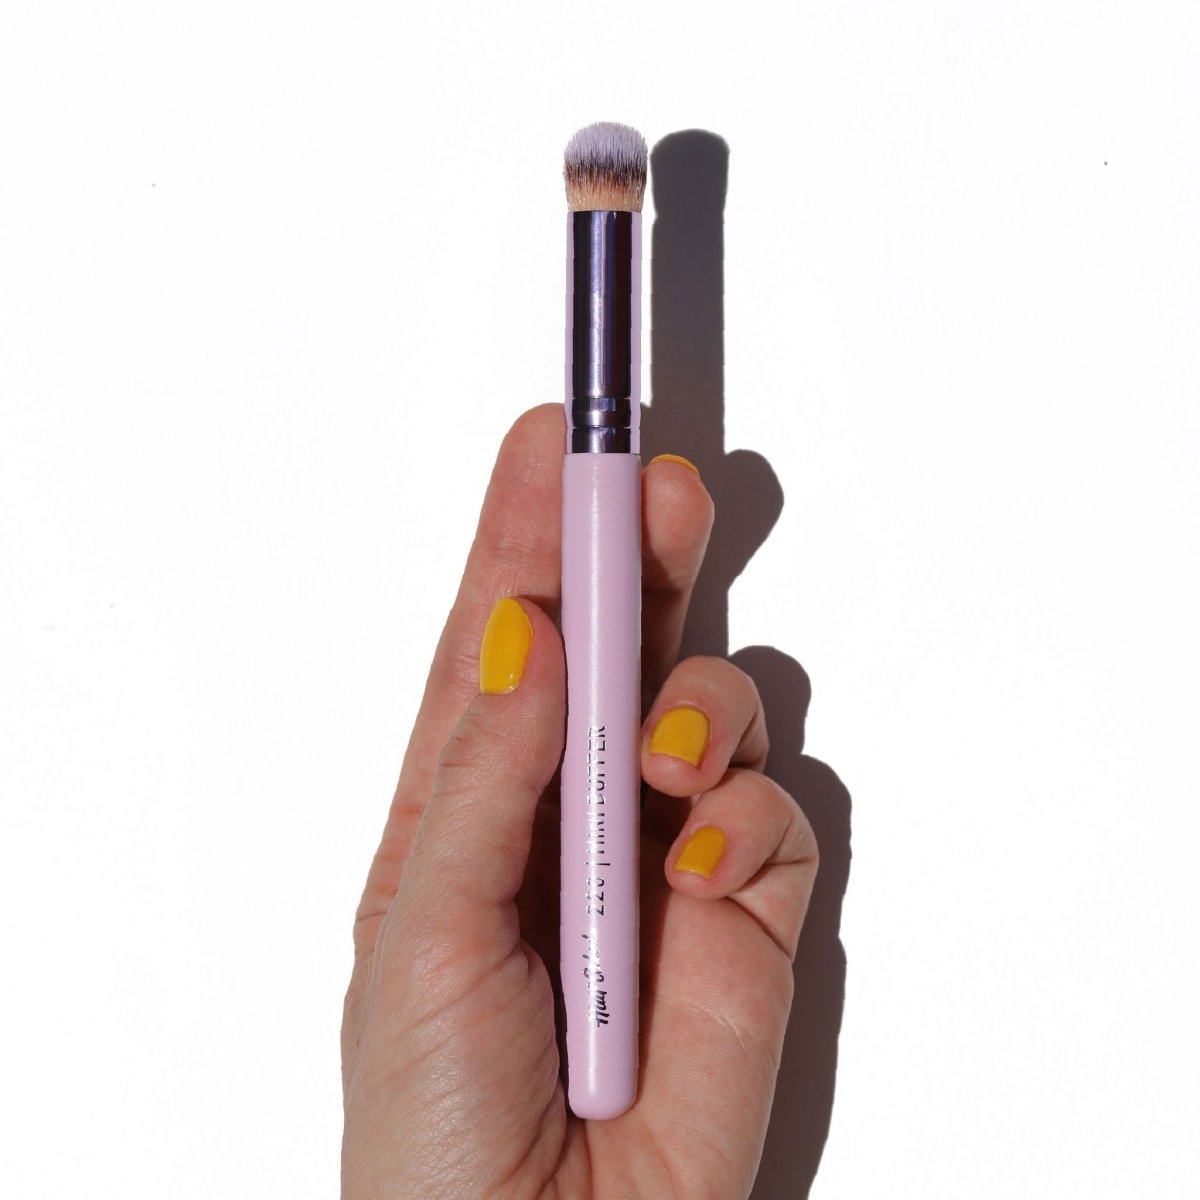 shiny purple concealer brush in hand with yellow nails - Mini Buffer Brush - Half Caked